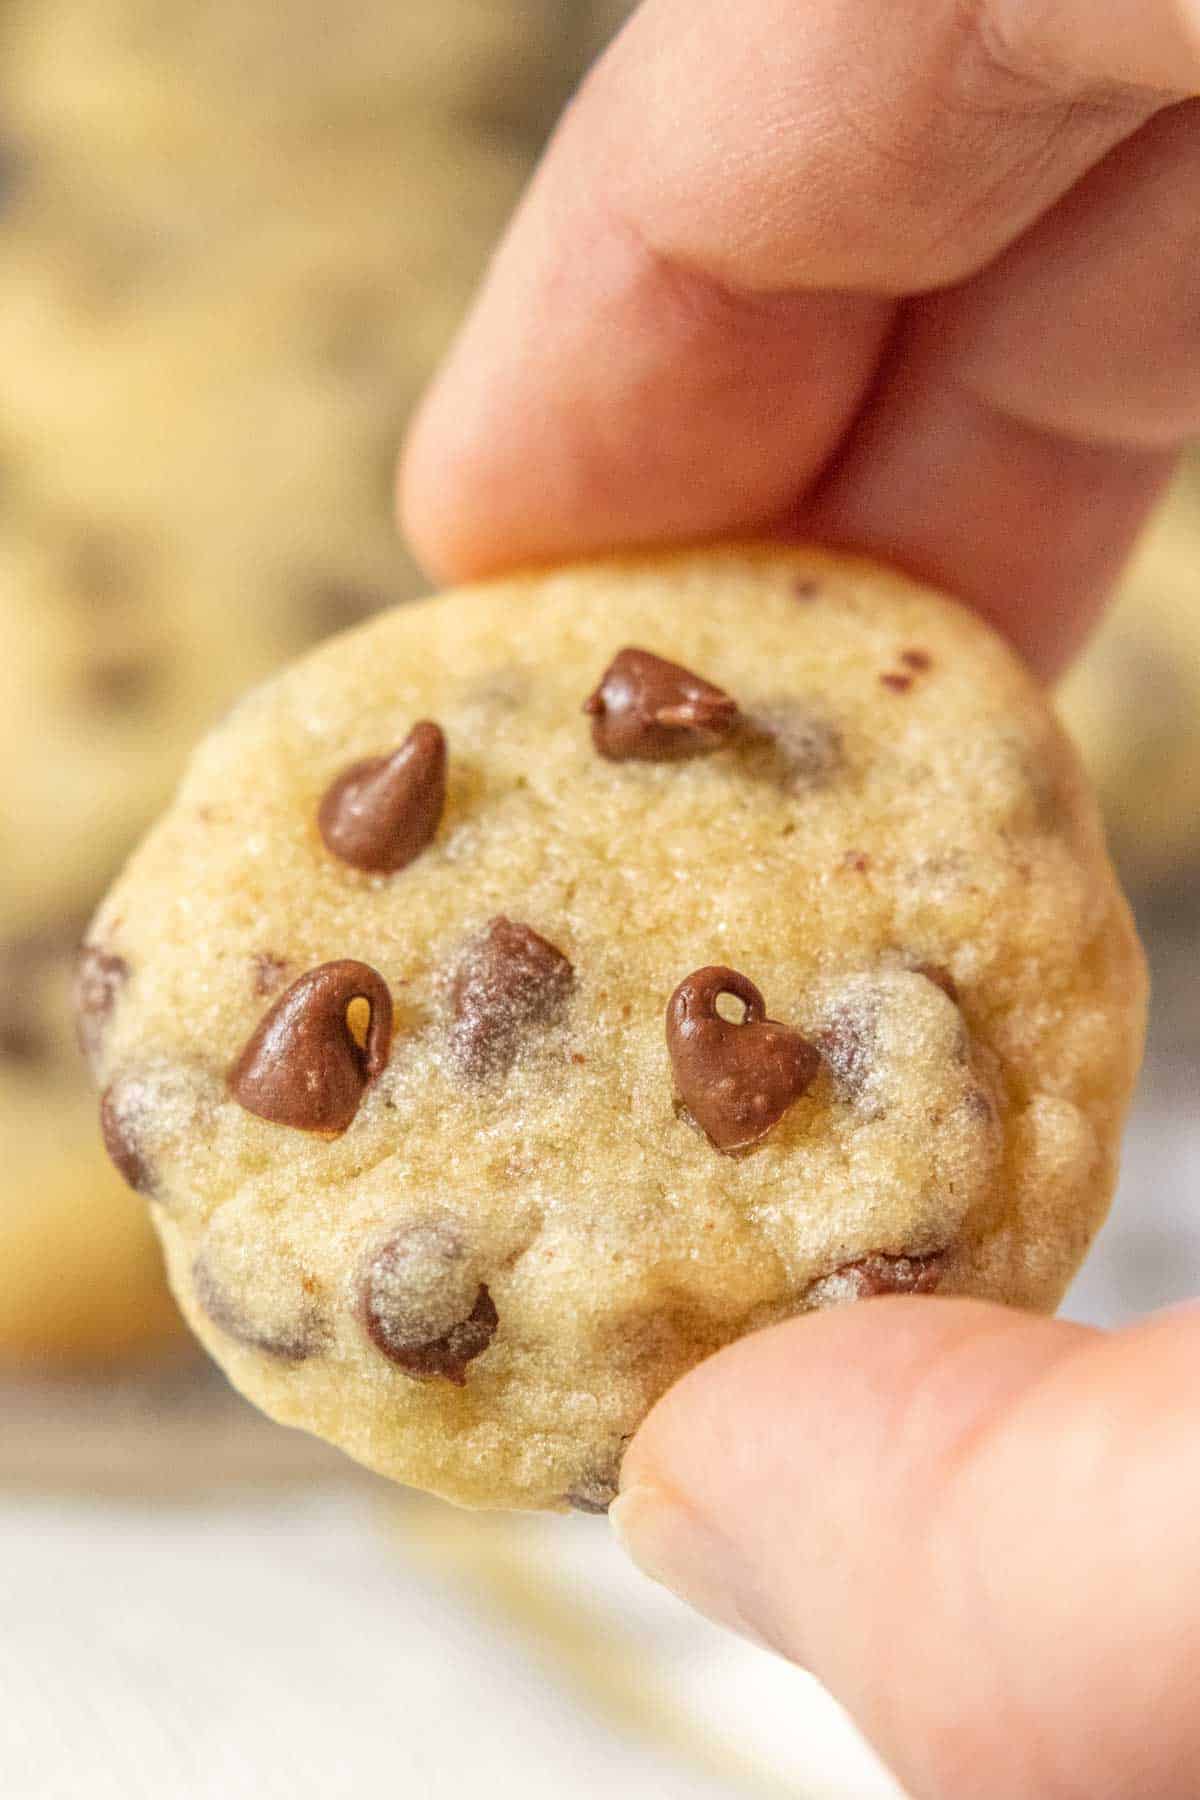 Mini chocolate chip cookie being held up to show size.